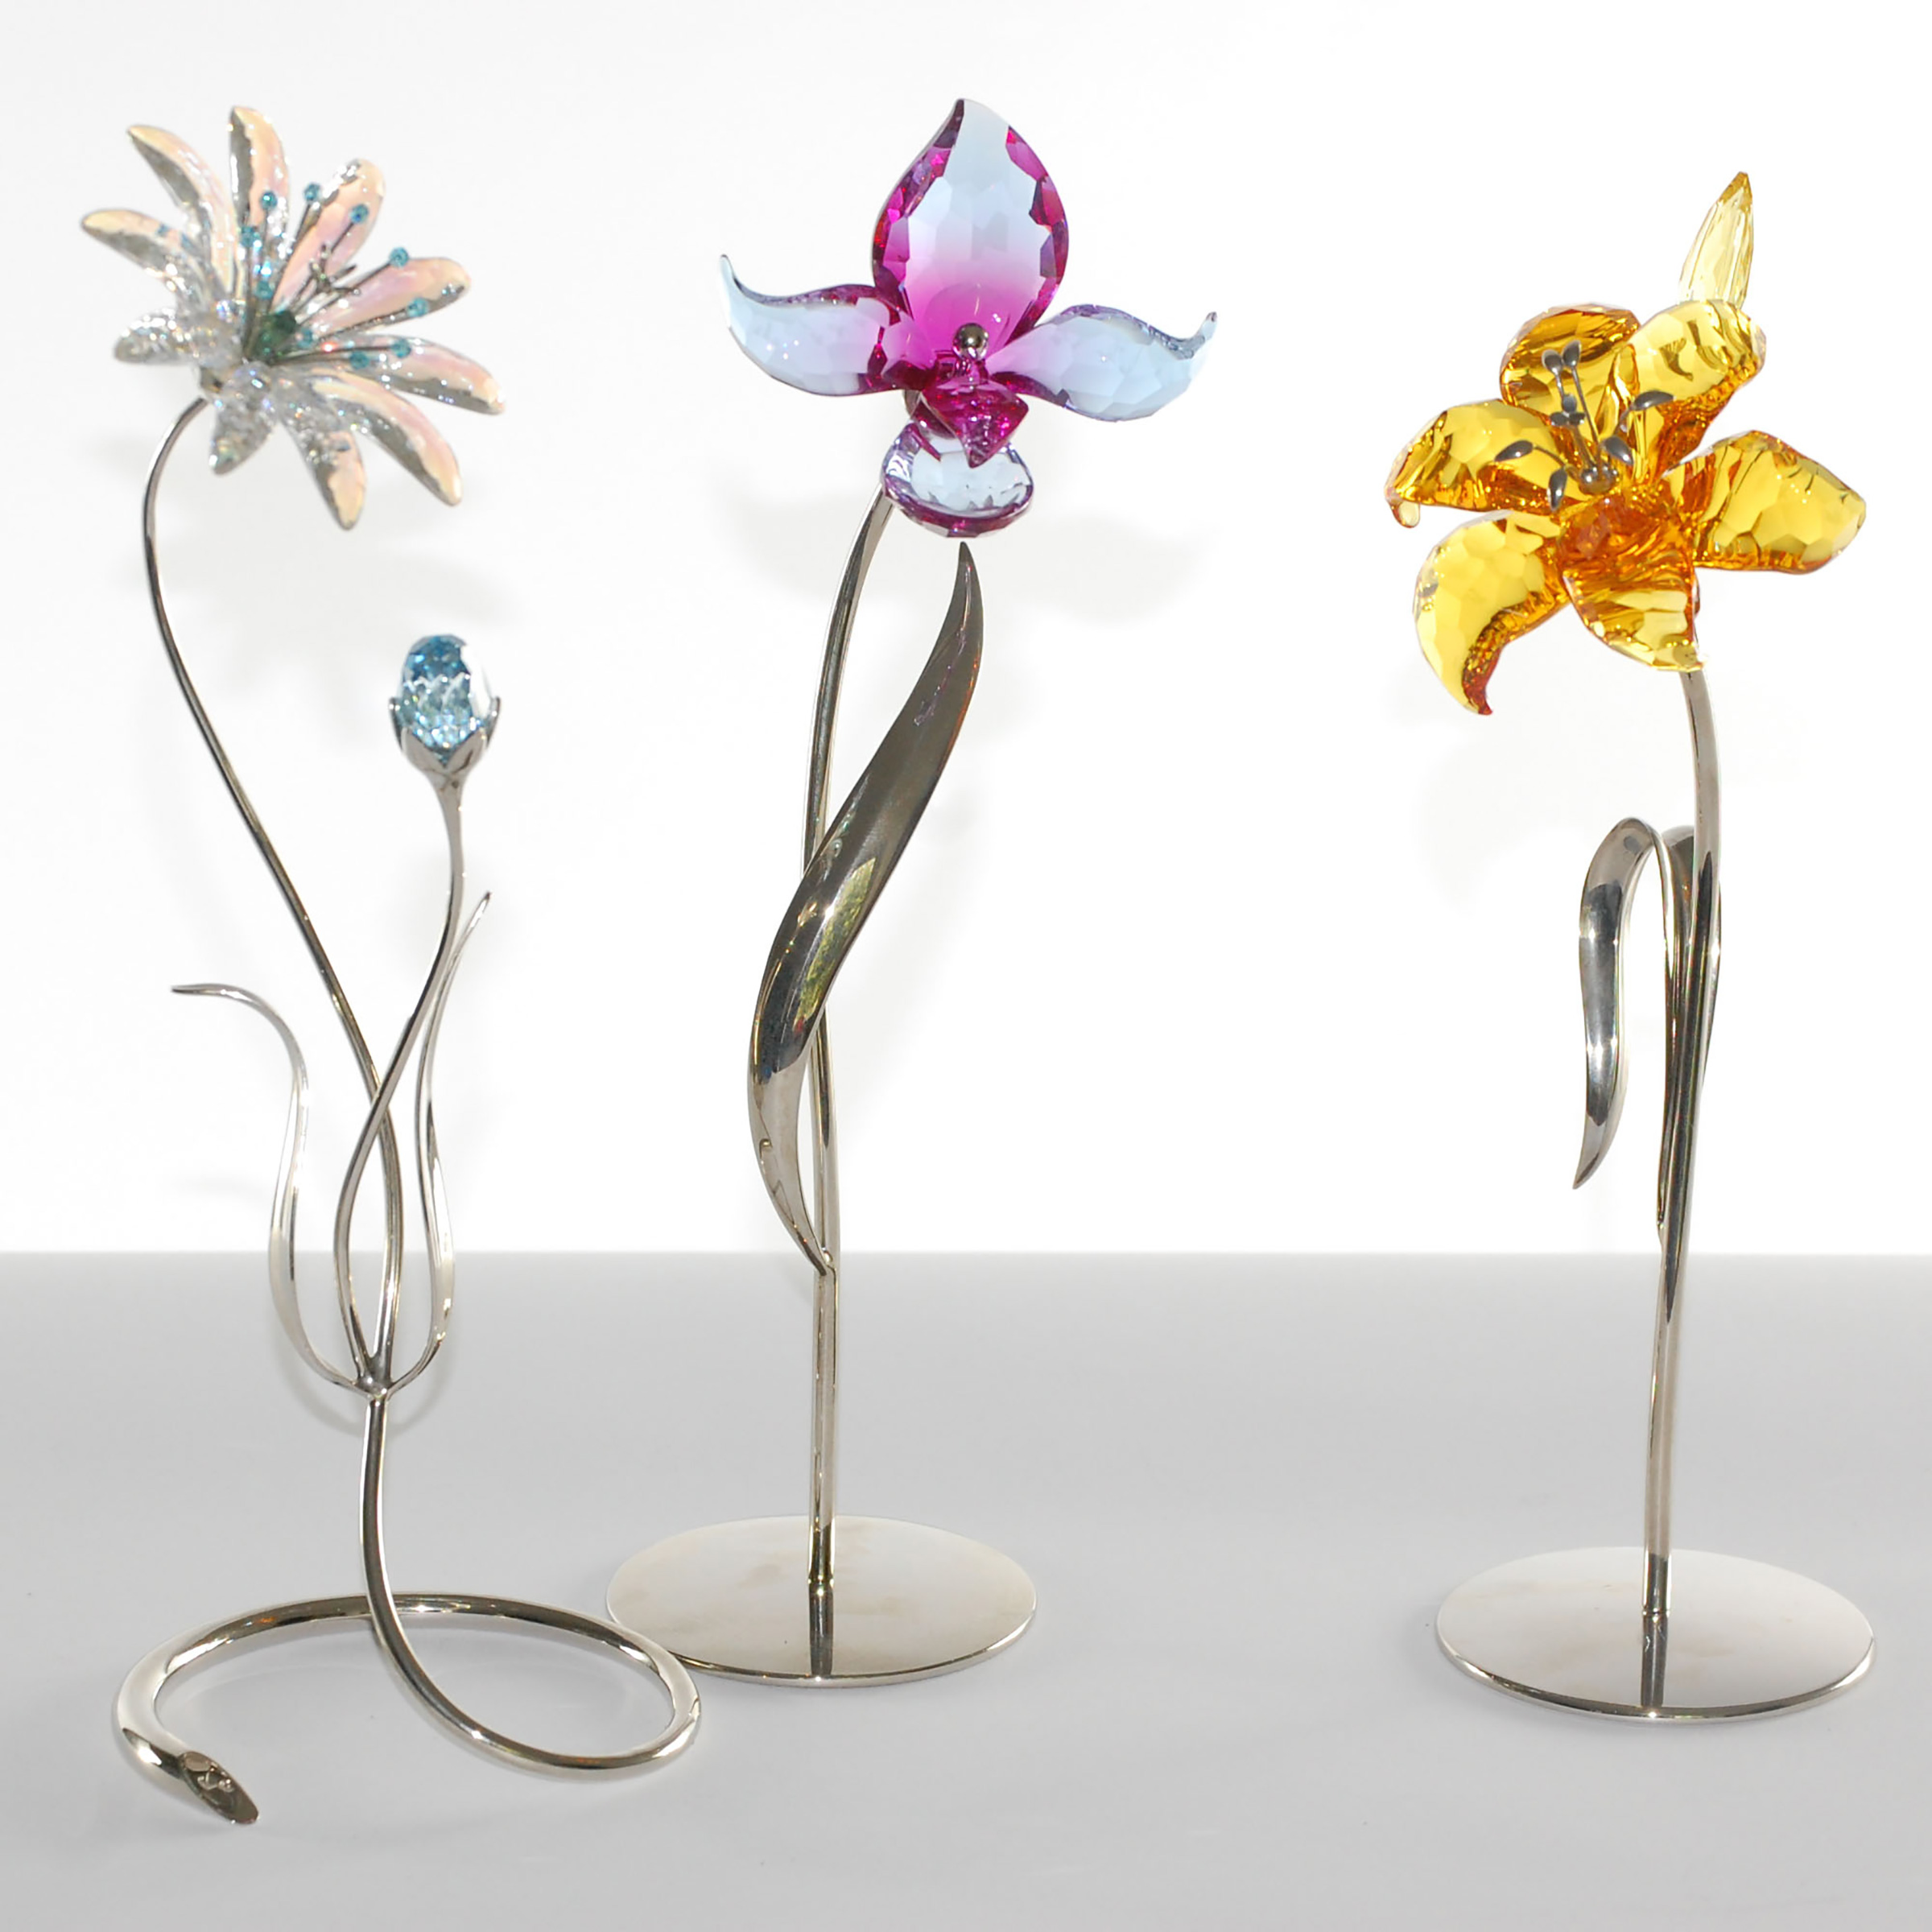 Swarovski Crystal Flowers: Dorora,   Dellaria and Tiger Lily, late 20th/early 21st century